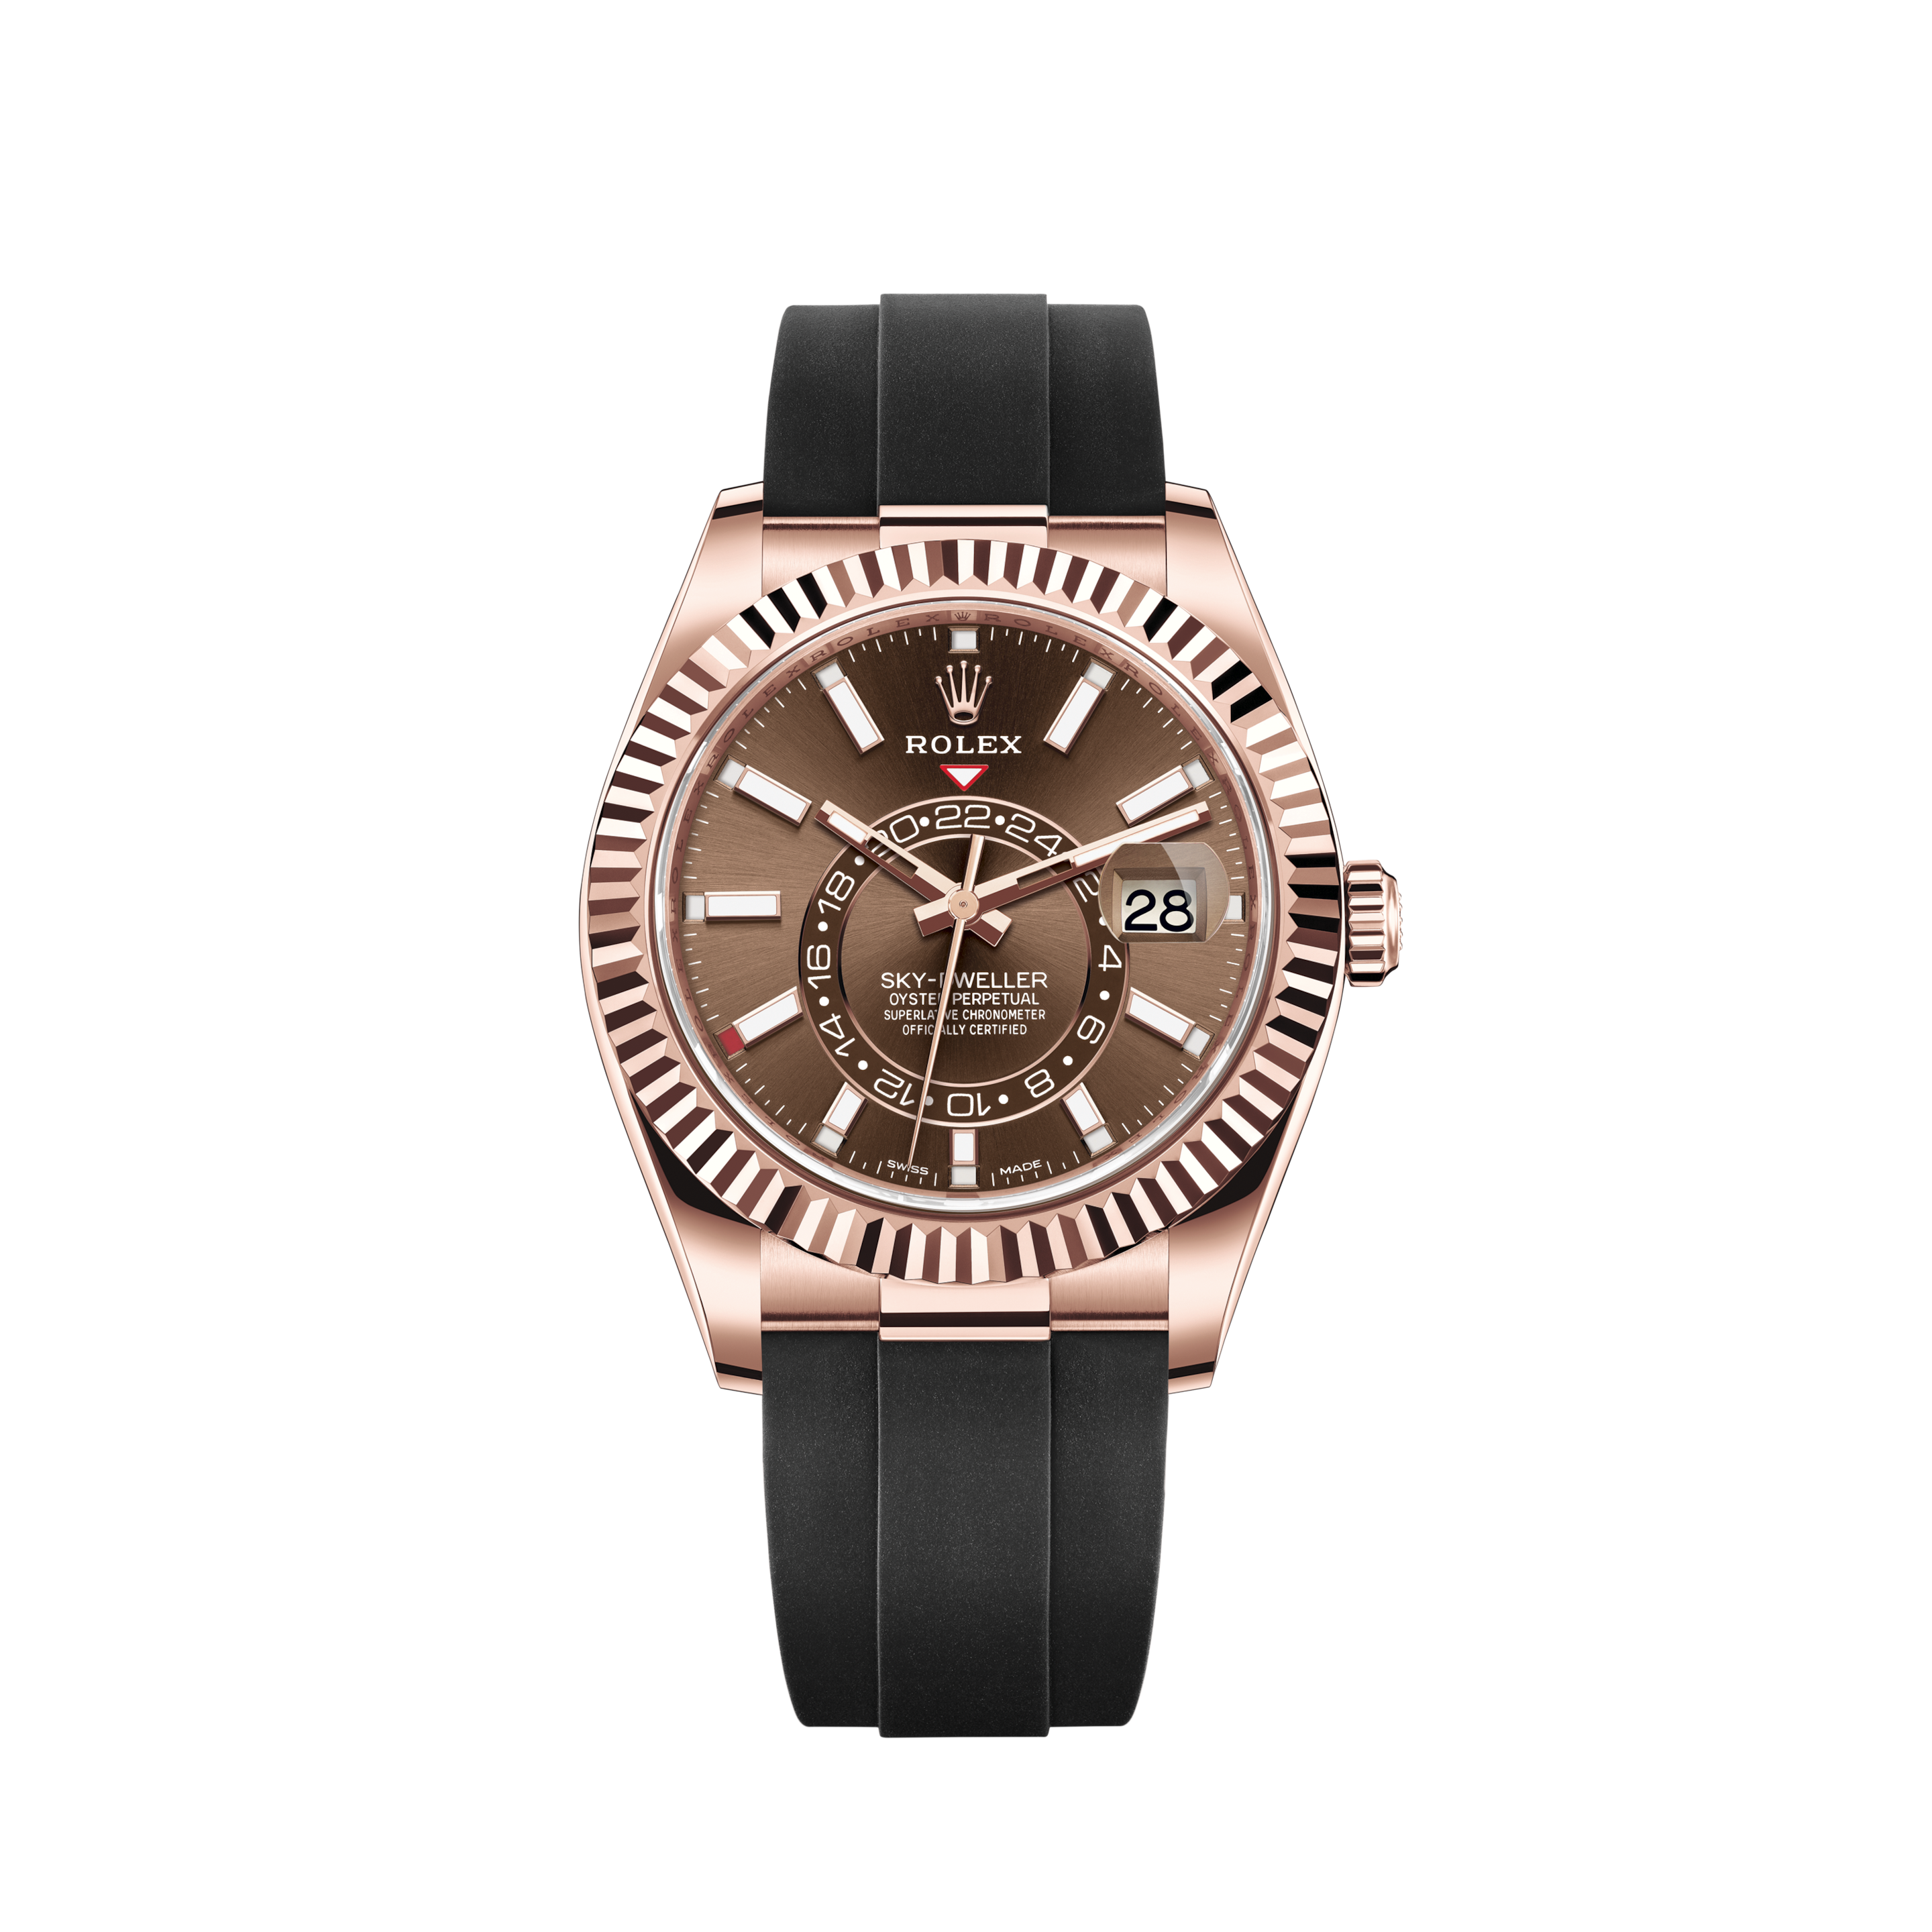 Rolex Datejust 36mm Stainless Steel & Rose Gold Jubilee - Box & Papers 2019Rolex Datejust 36mm Stainless Steel / Jubilee / Black Roman Sunbeam Dial - With Box And Papers